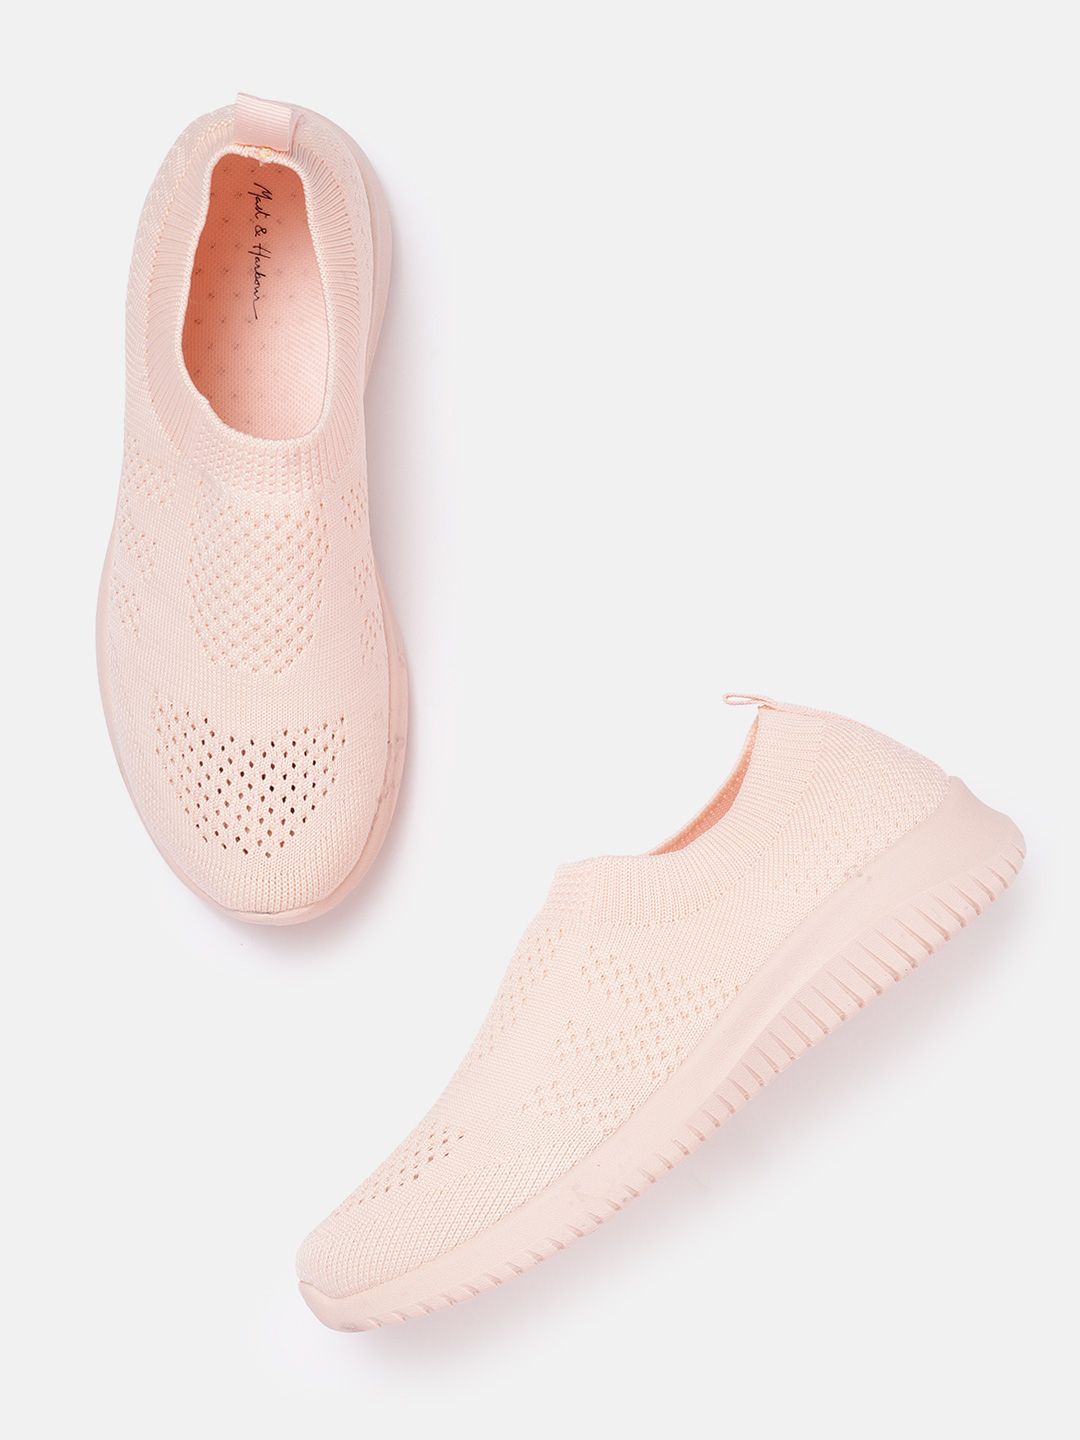 Mast & Harbour Women Peach-Coloured Woven Design Slip-On Sneakers Price in India